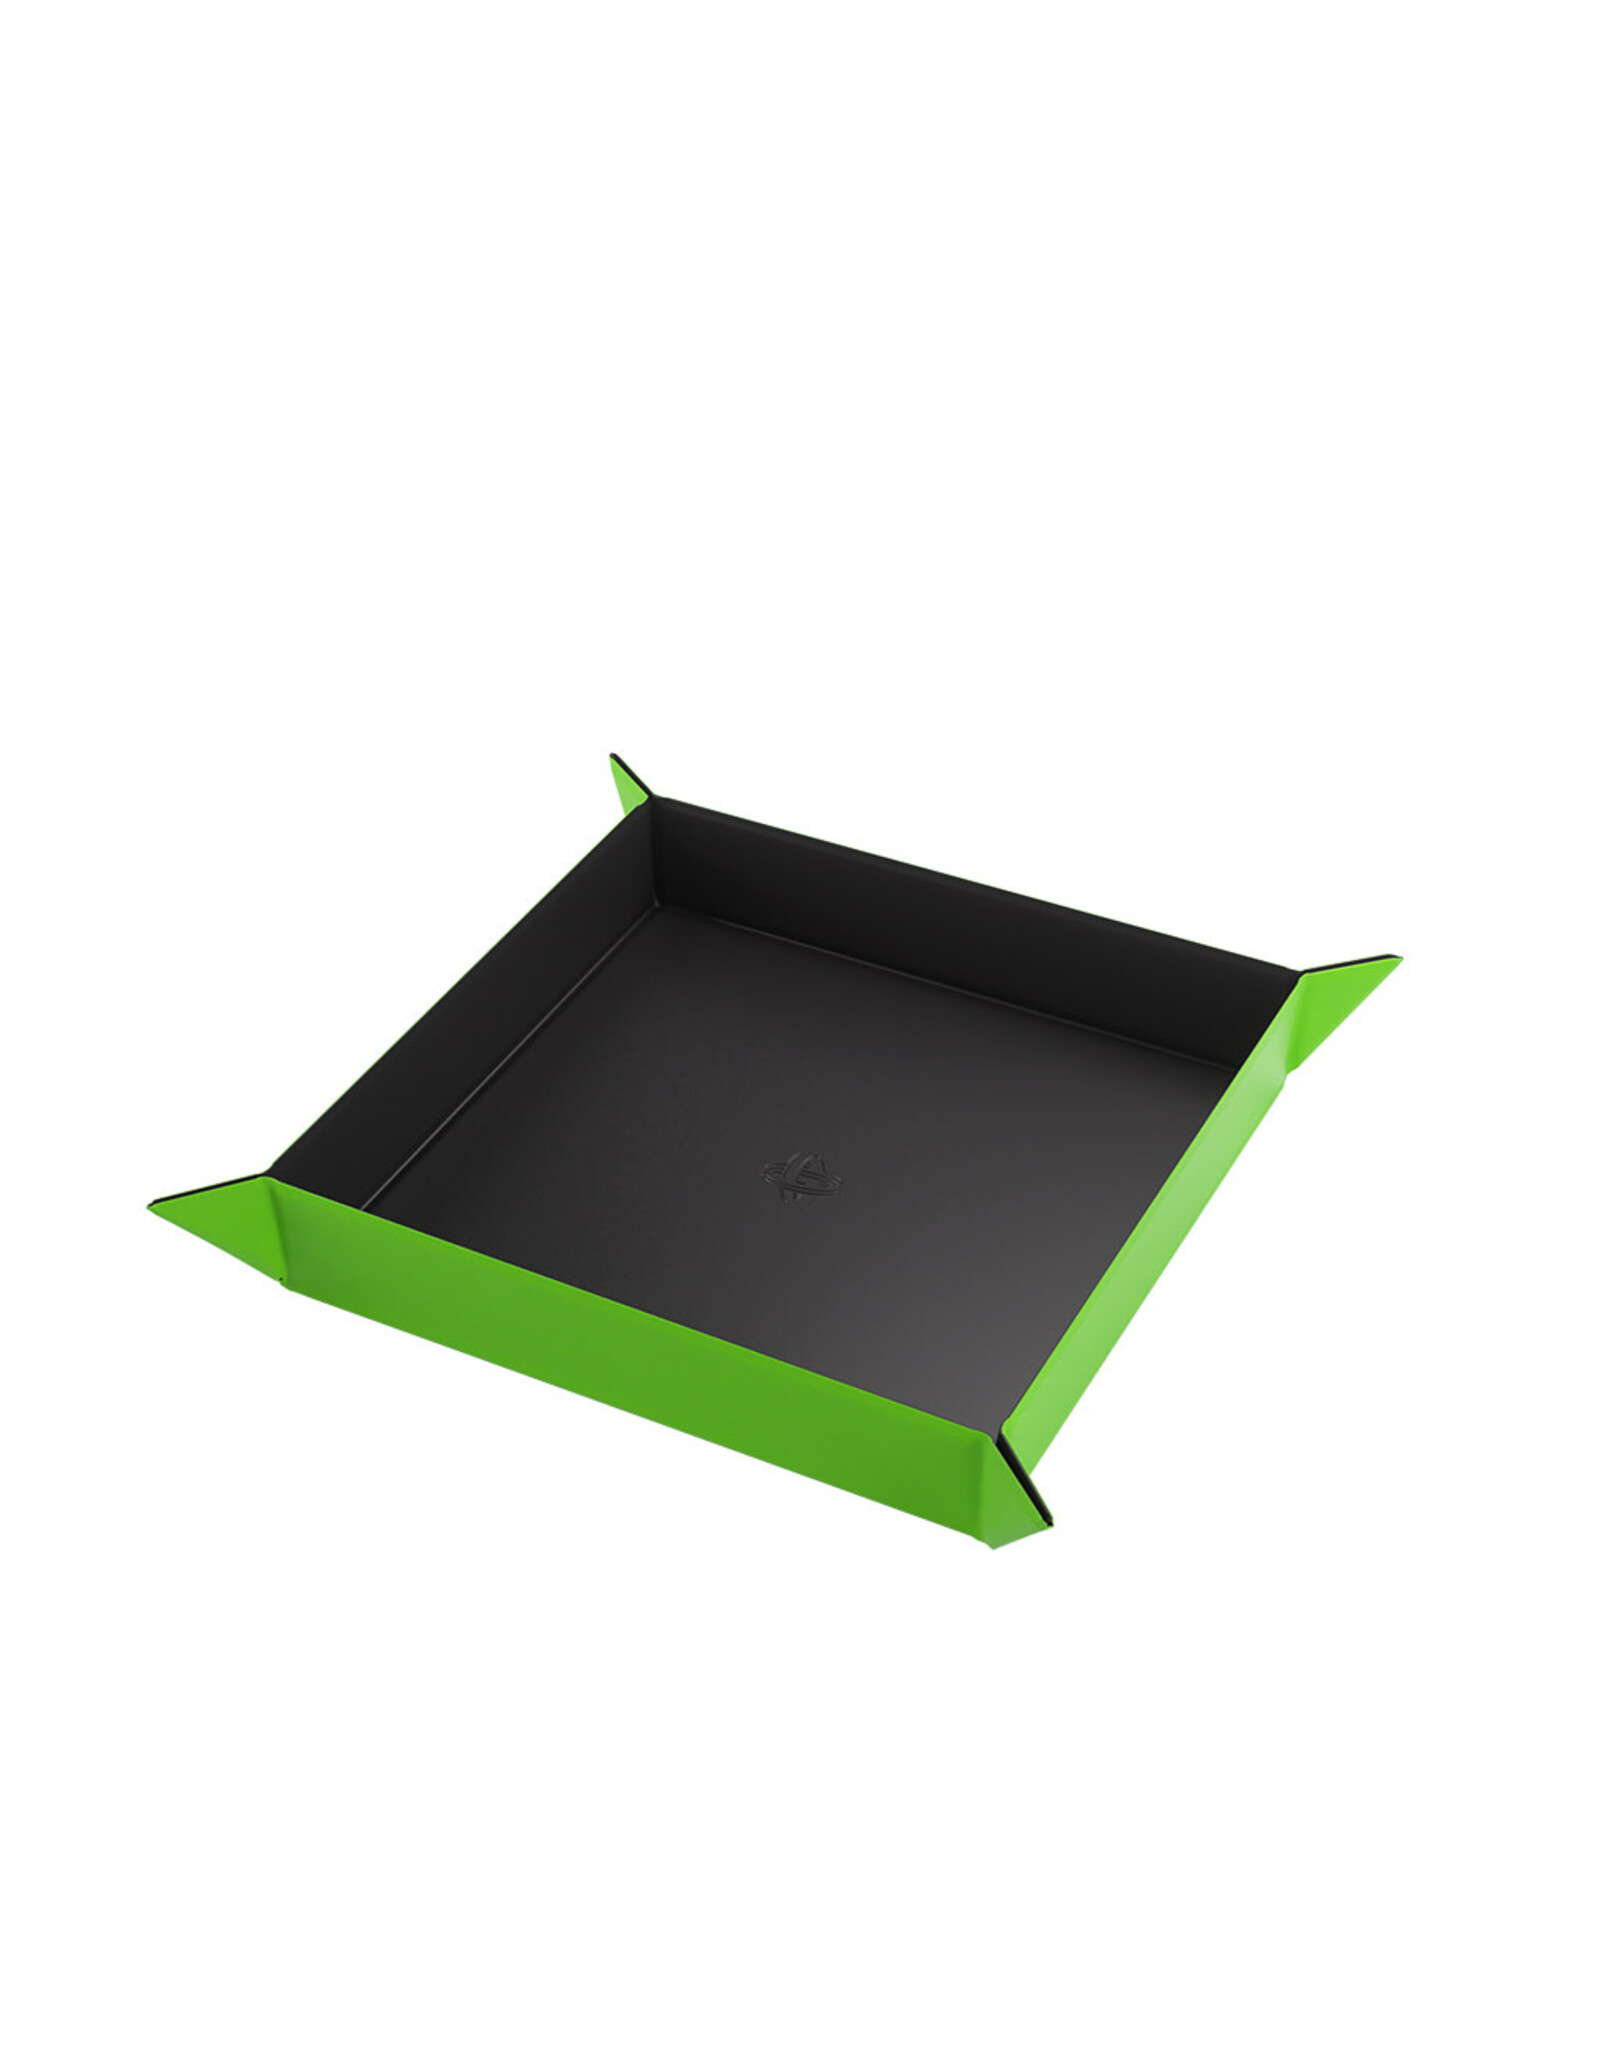 Gamegenic Gamegenic  Magnetic Dice Tray Square Black/Green